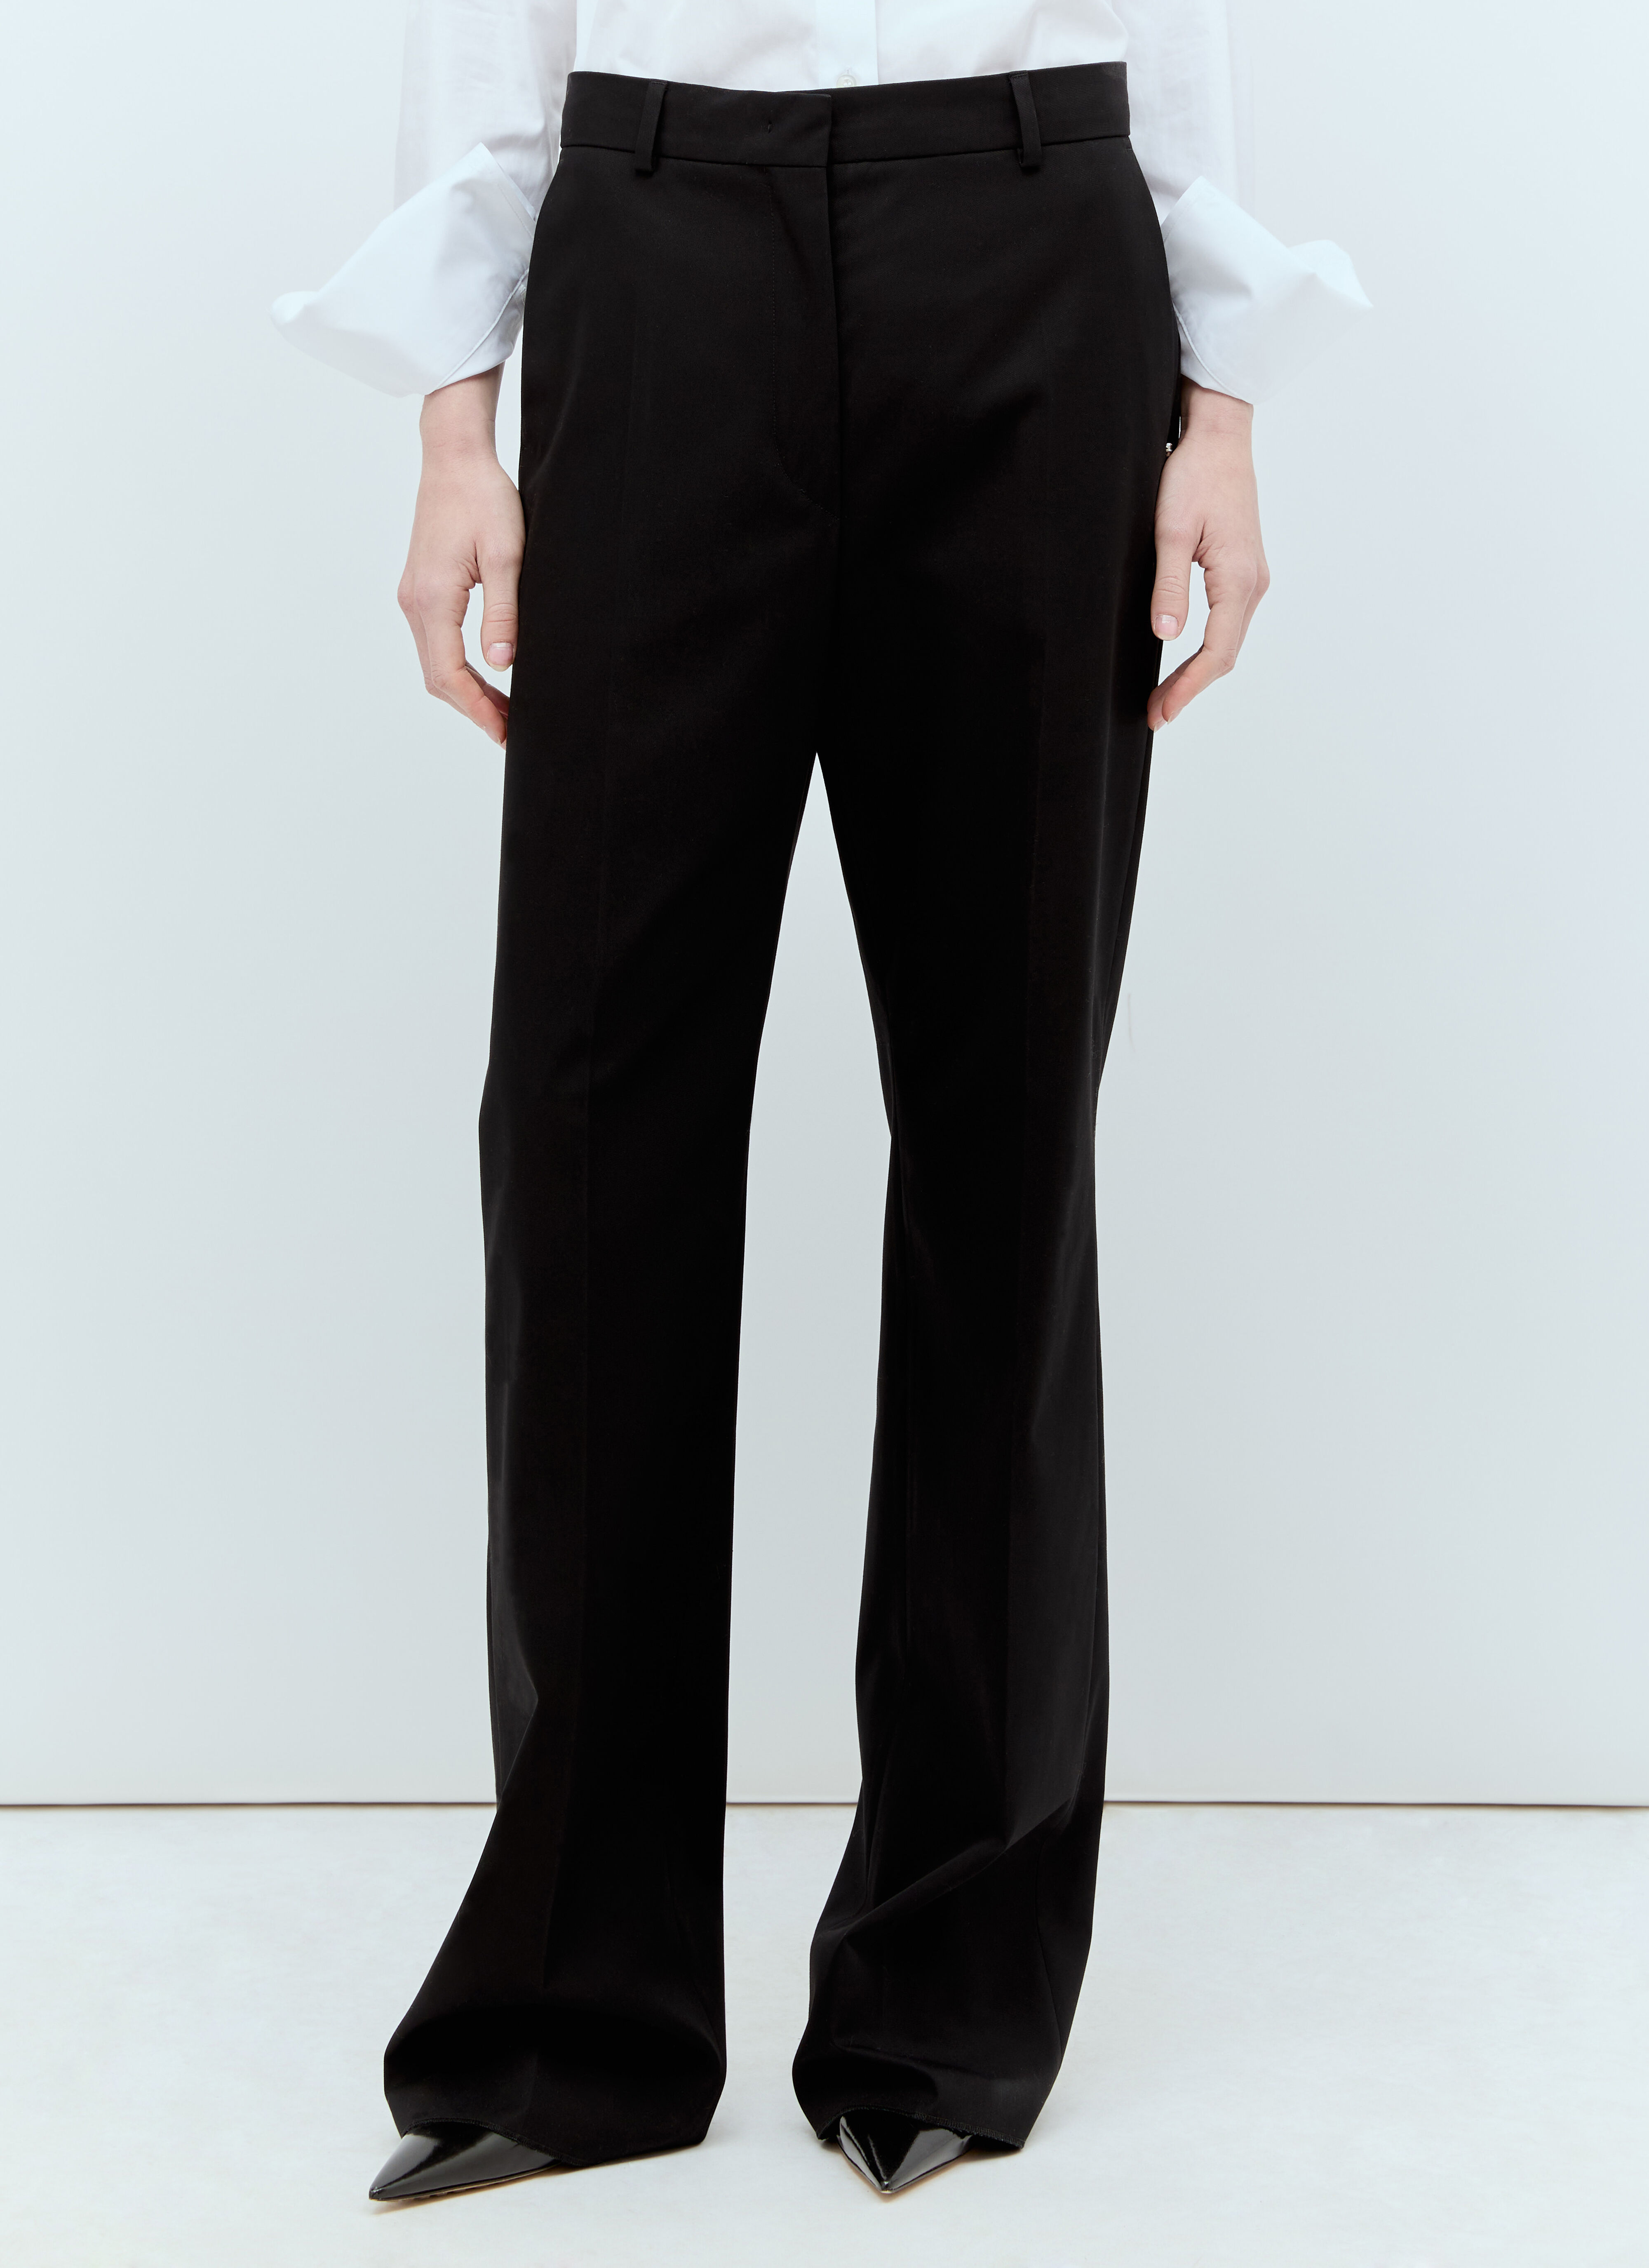 Sportmax Tailored Twill Pants White spx0256010